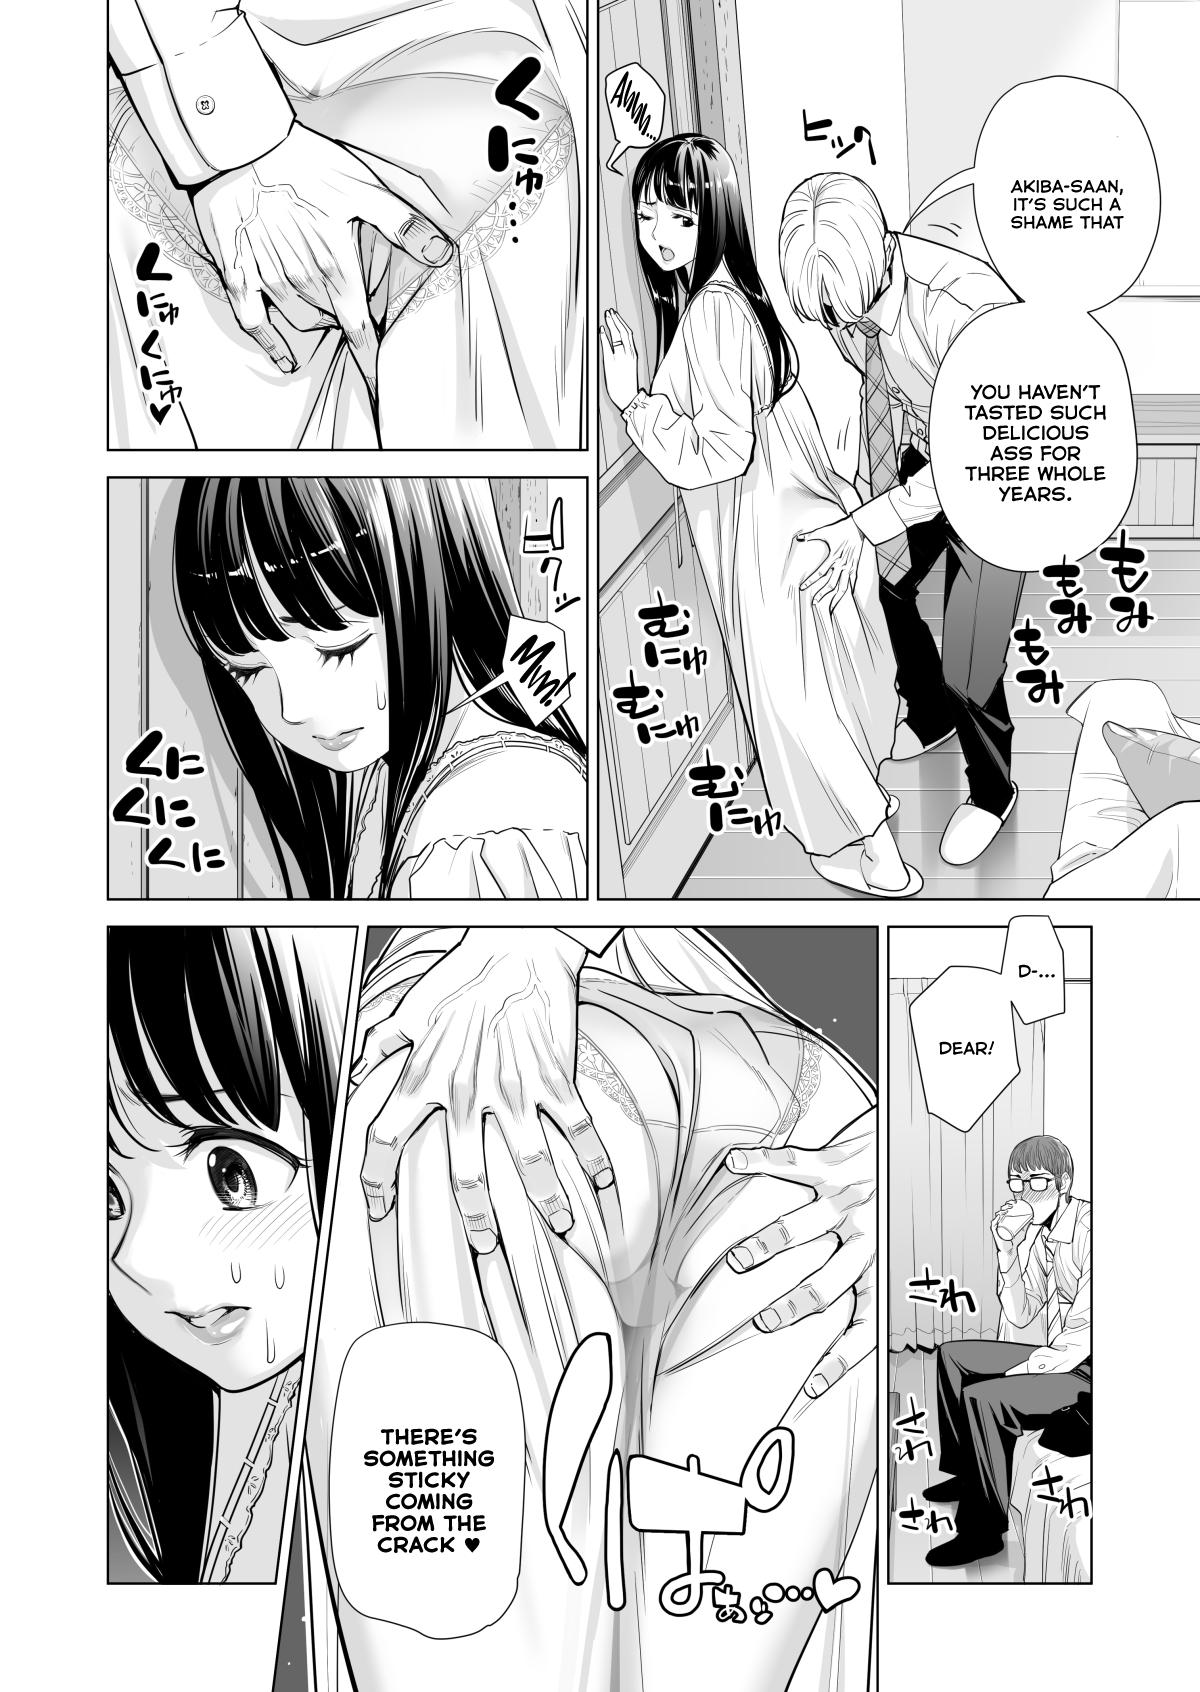 [HGT Lab (Tsusauto)] Tsukiyo no Midare Zake (Zenpen) Moonlit Intoxication ~ A Housewife Stolen by a Coworker Besides her Blackout Drunk Husband ~ Chapter 1 [English] 18